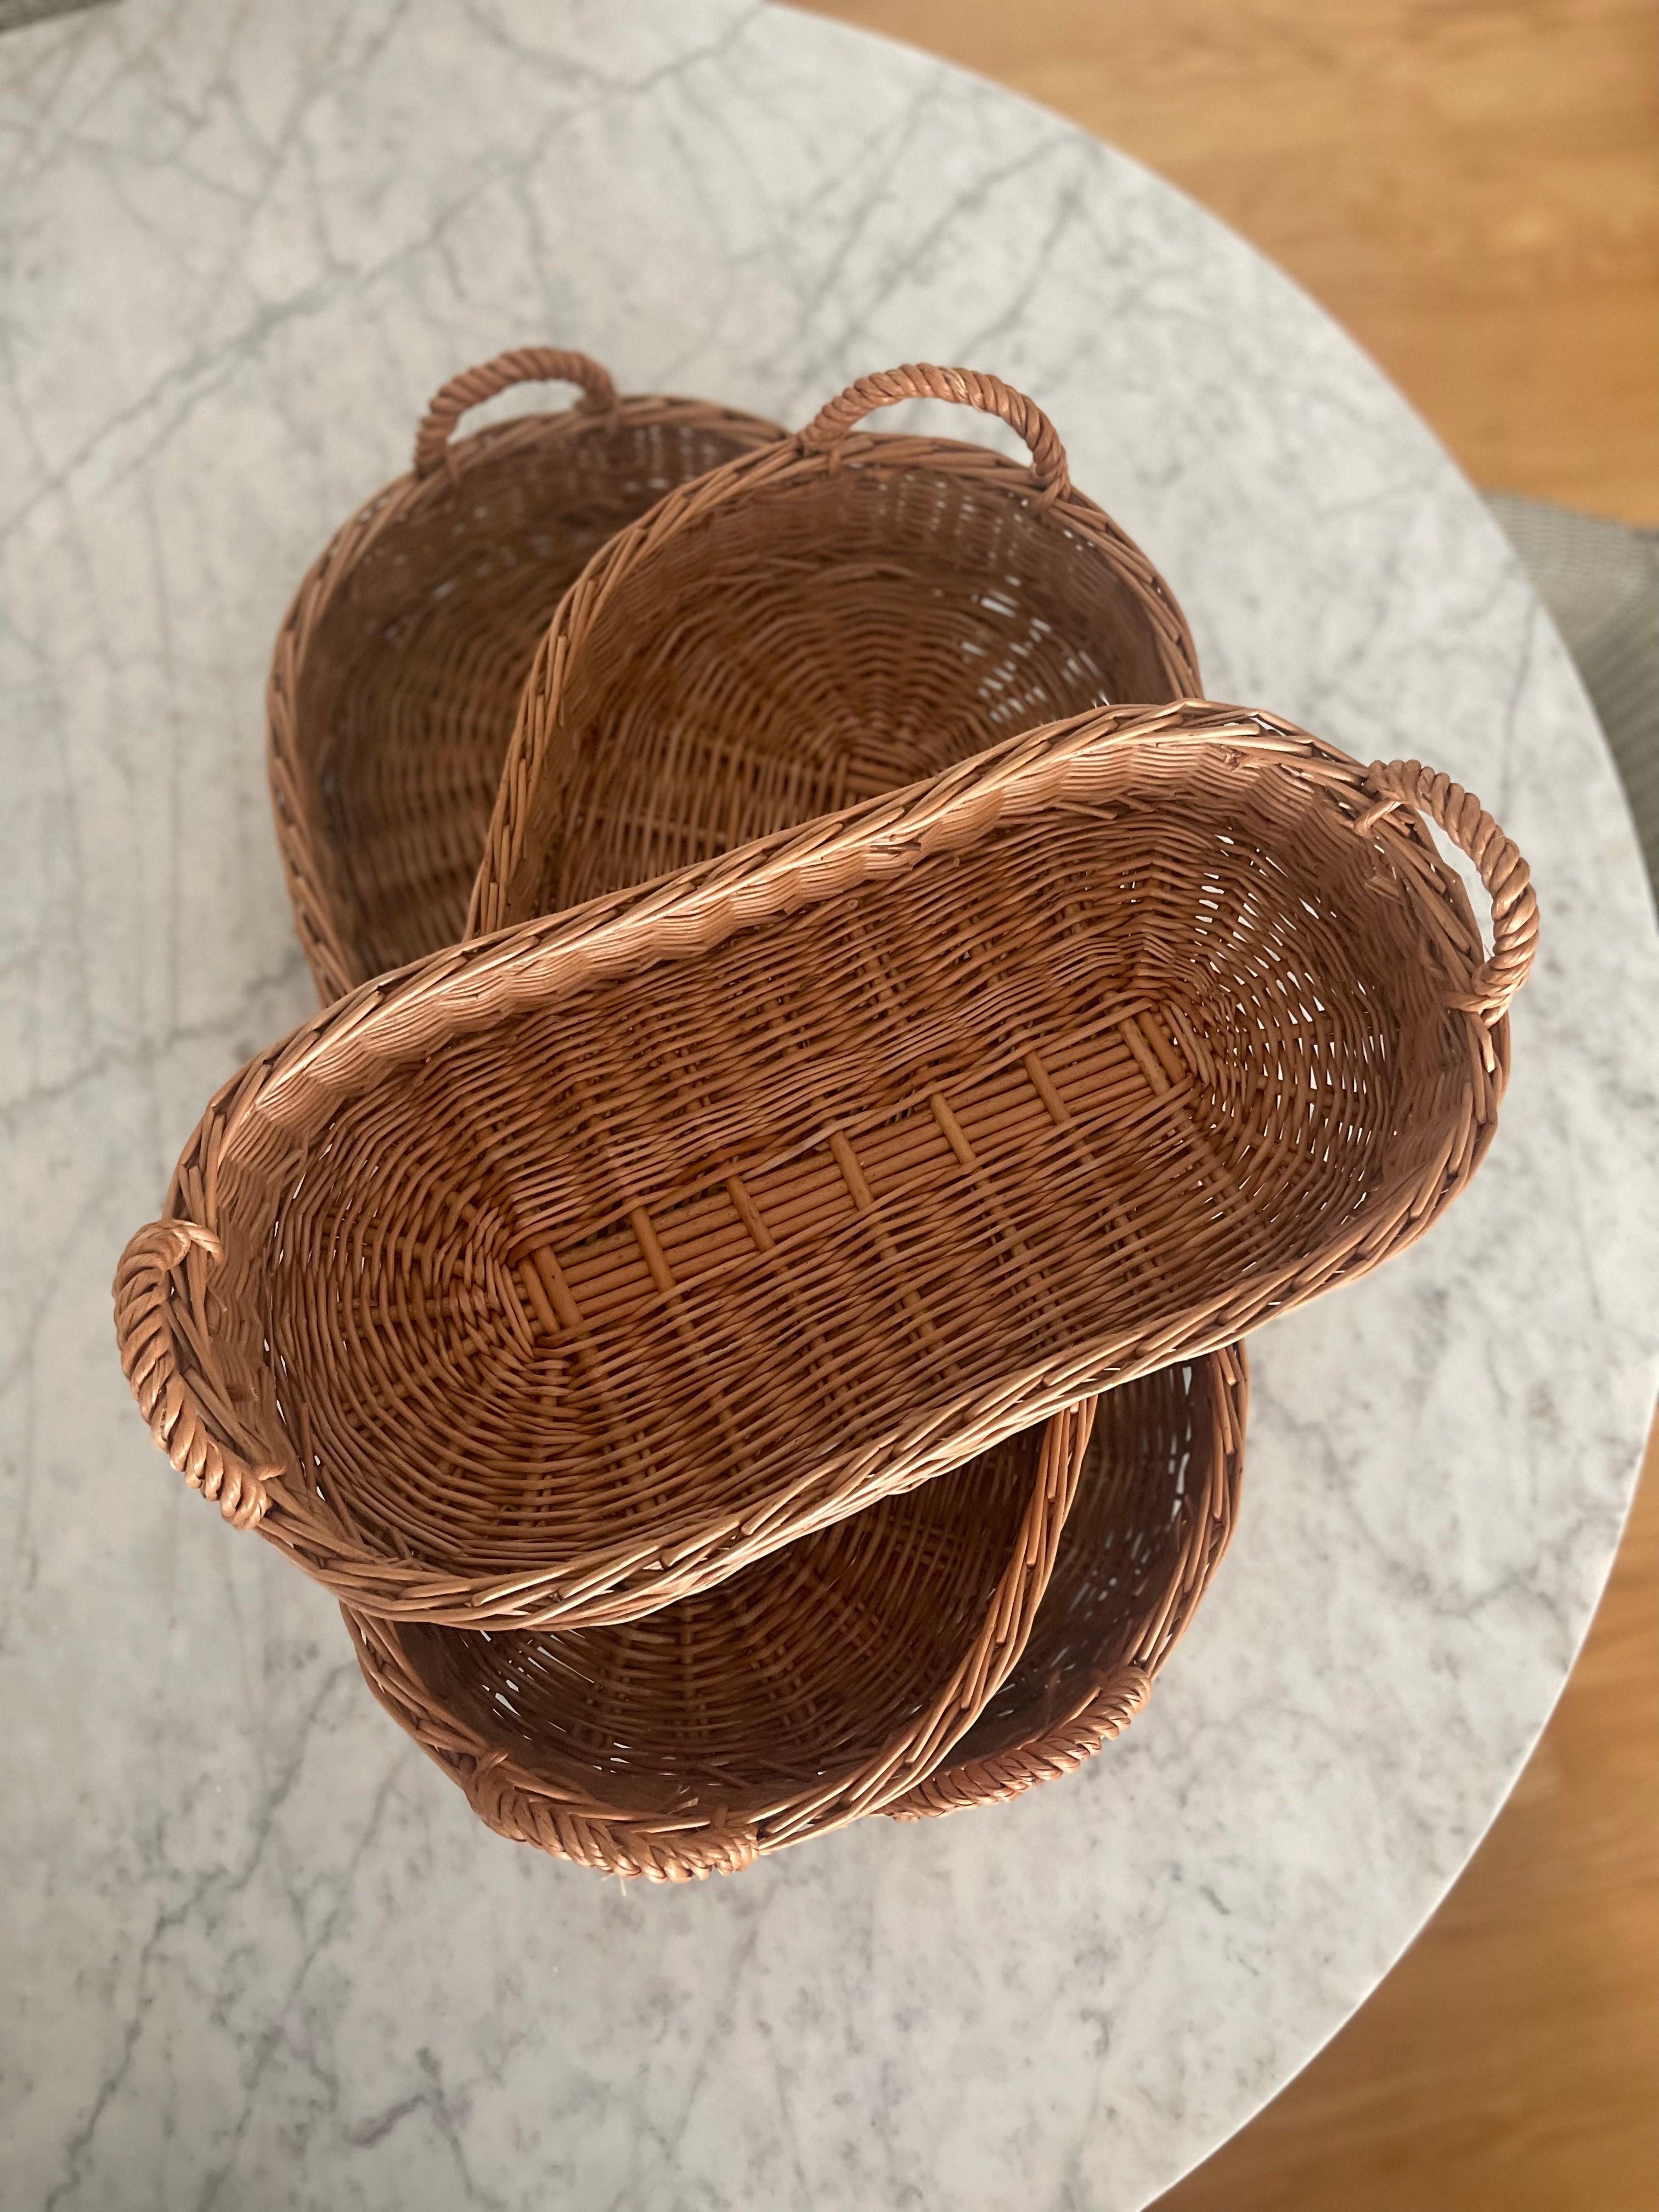 Oval Small Wicker Serving Tray 18”L, 9”D